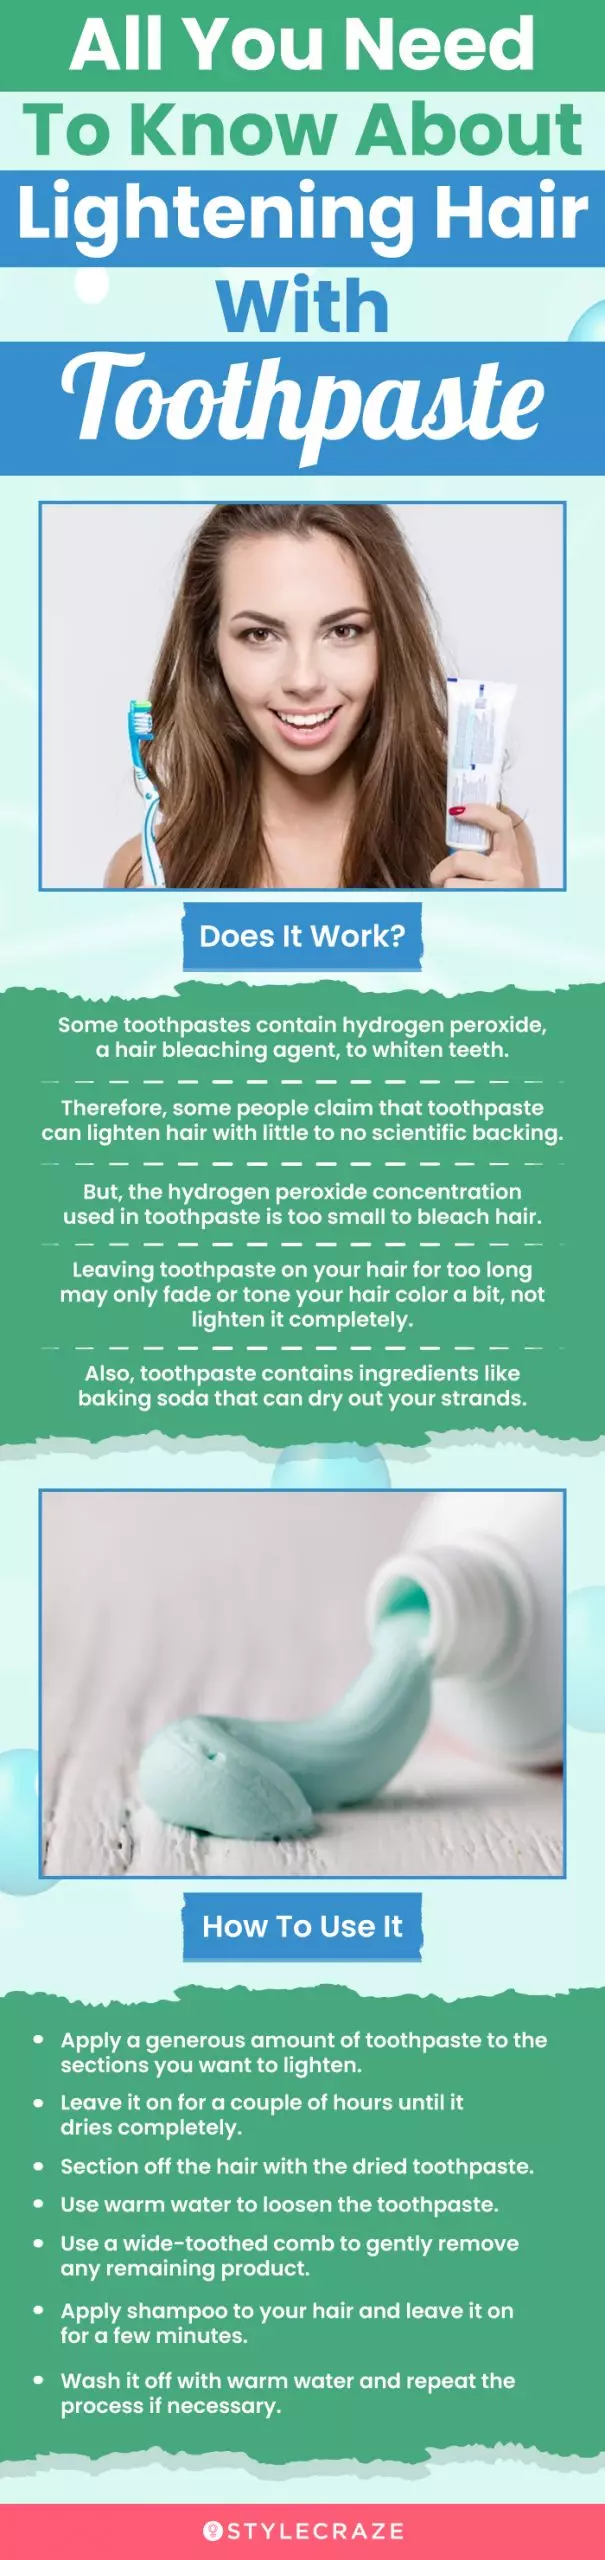 all you need to know about lightening hair with toothpaste (infographic)